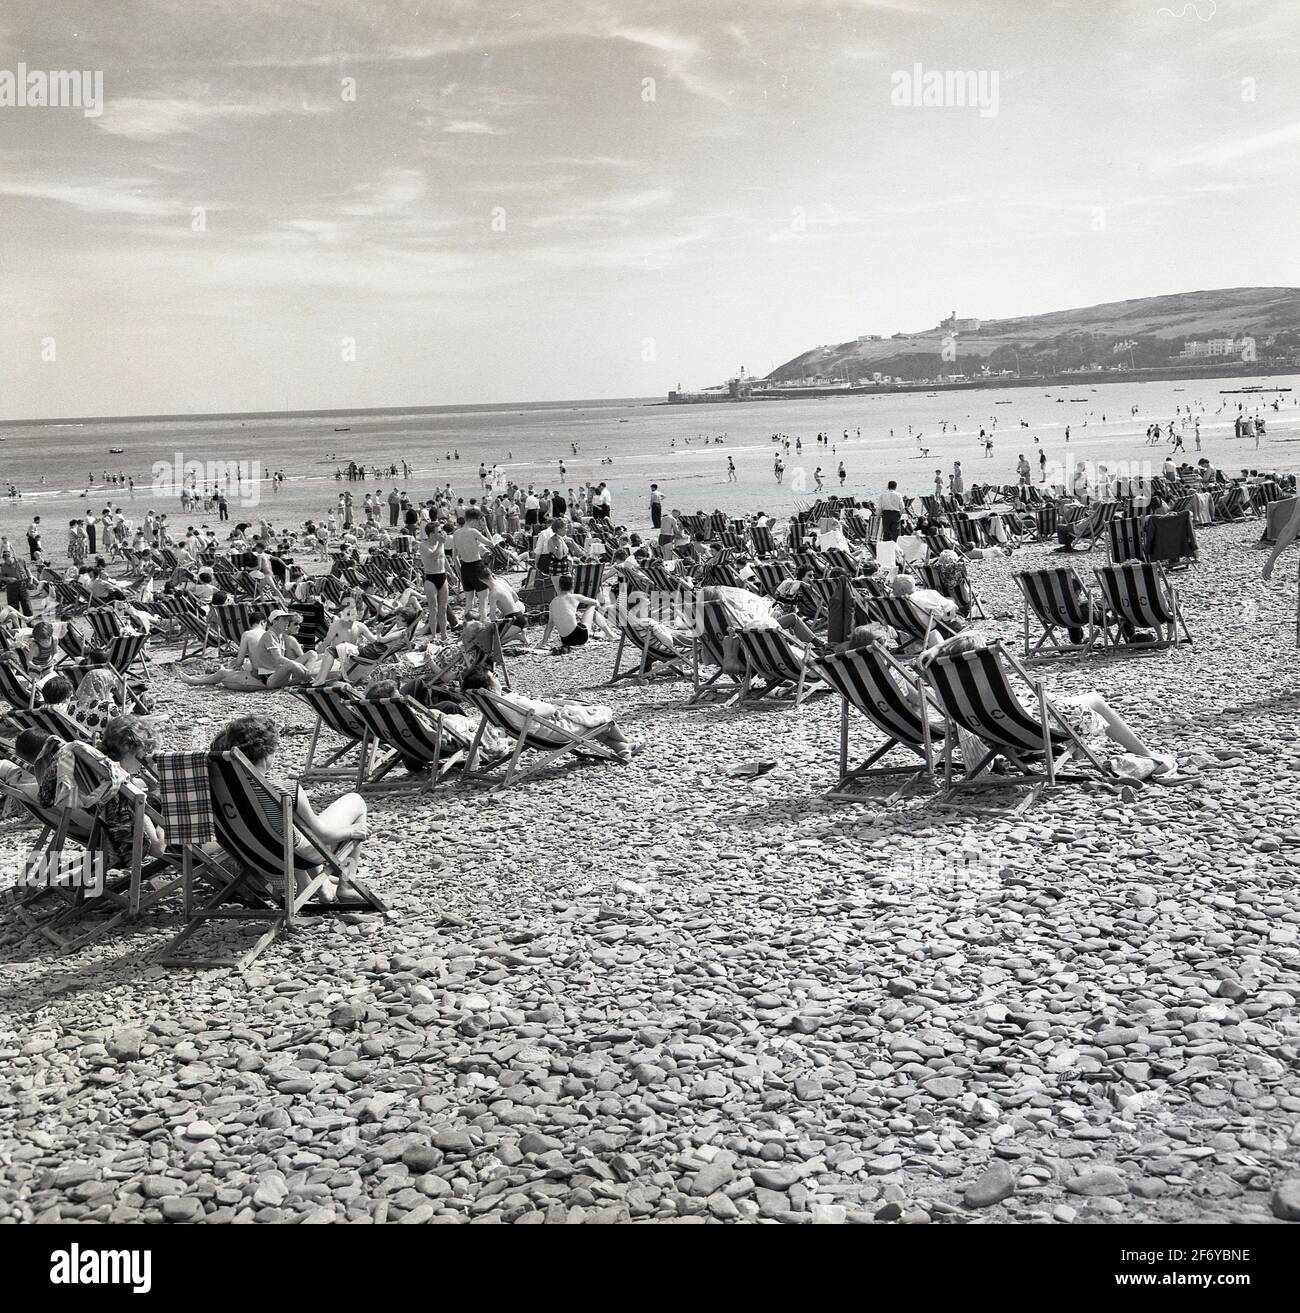 1950s, historical, at the coast, holidaymakers sitting in deckchairs on a stoney beach, England, UK. The simple deckchair is an icon of the British seaside and and relaxing in one on a summer's day is a tradition dating back to Victorian times. In post-war Britain, before the advent of overseas holidays, it remained as popular as ever, with the press reporting that on one day in August 1957 over 66,000 deckchairs were hired out on Blackpool beach. While those numbers may not be seen again, the deckchair has an evergreen appeal, based on nostalgia and its simple, effective design. Stock Photo